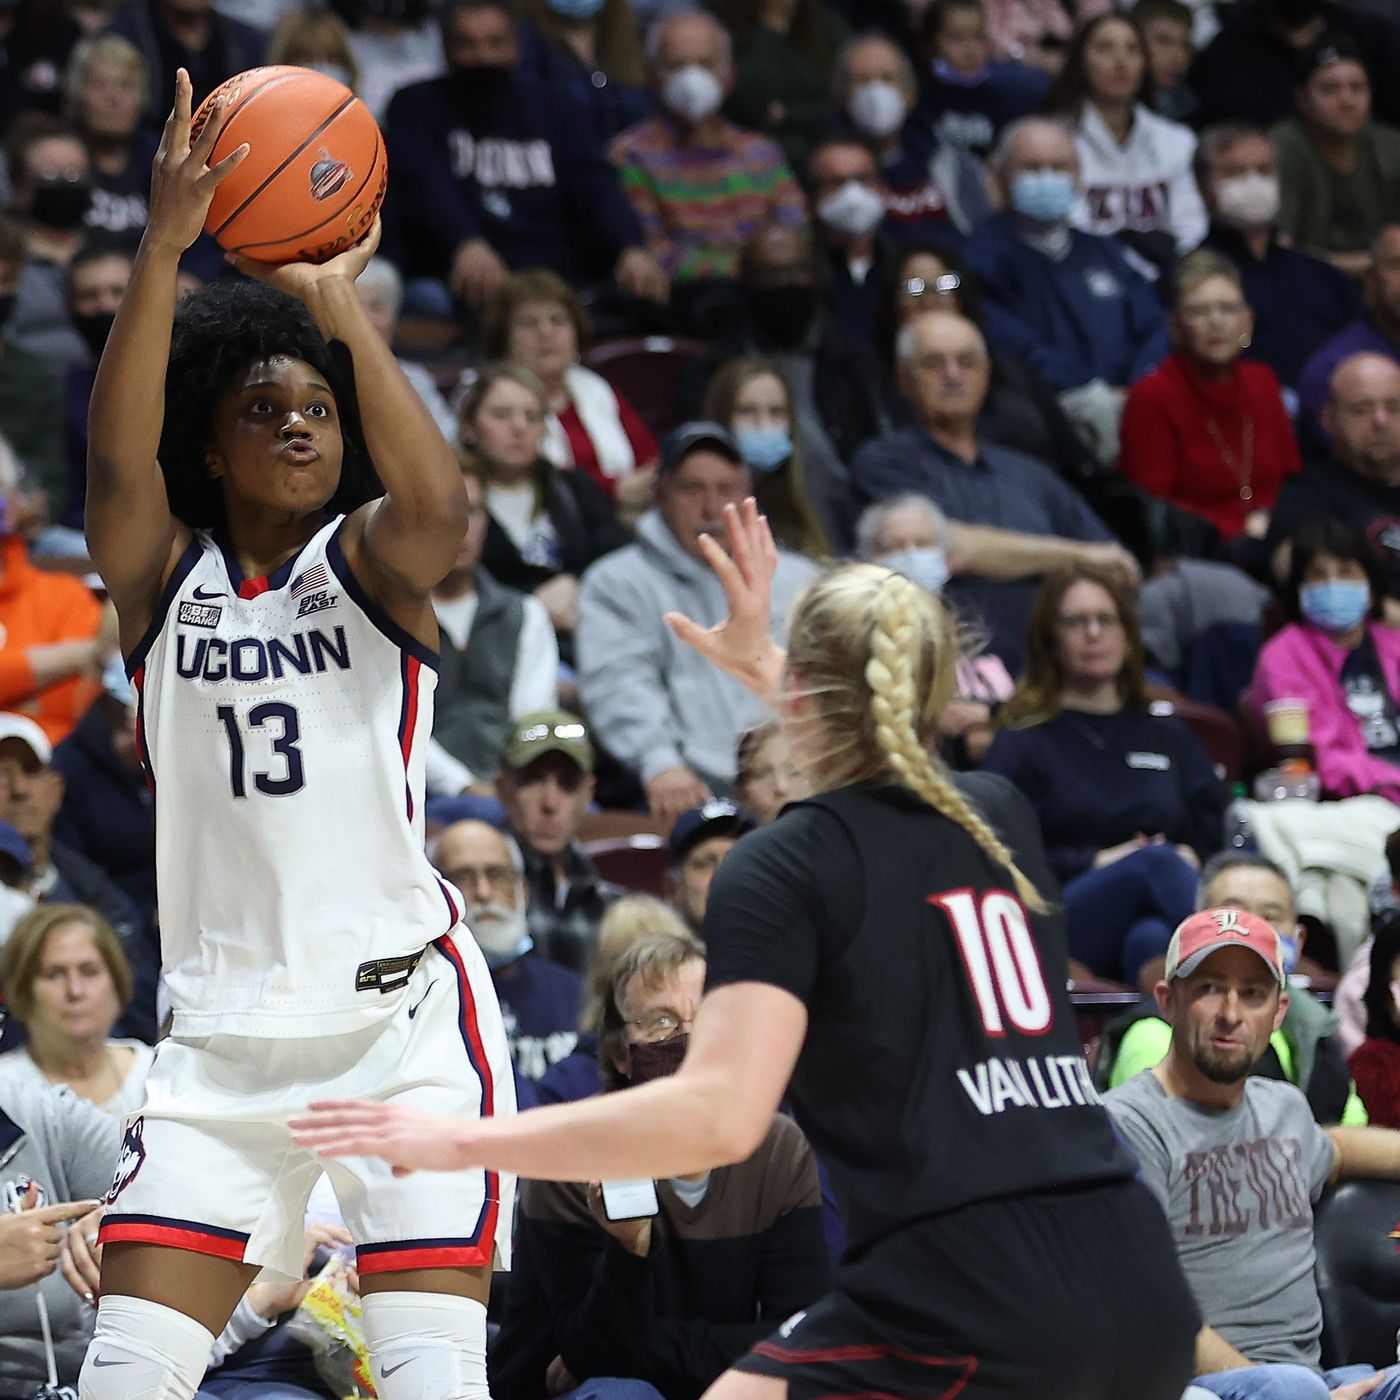 UConn women's basketball dropped by No. 6 Louisville, 69-64 - The UConn Blog